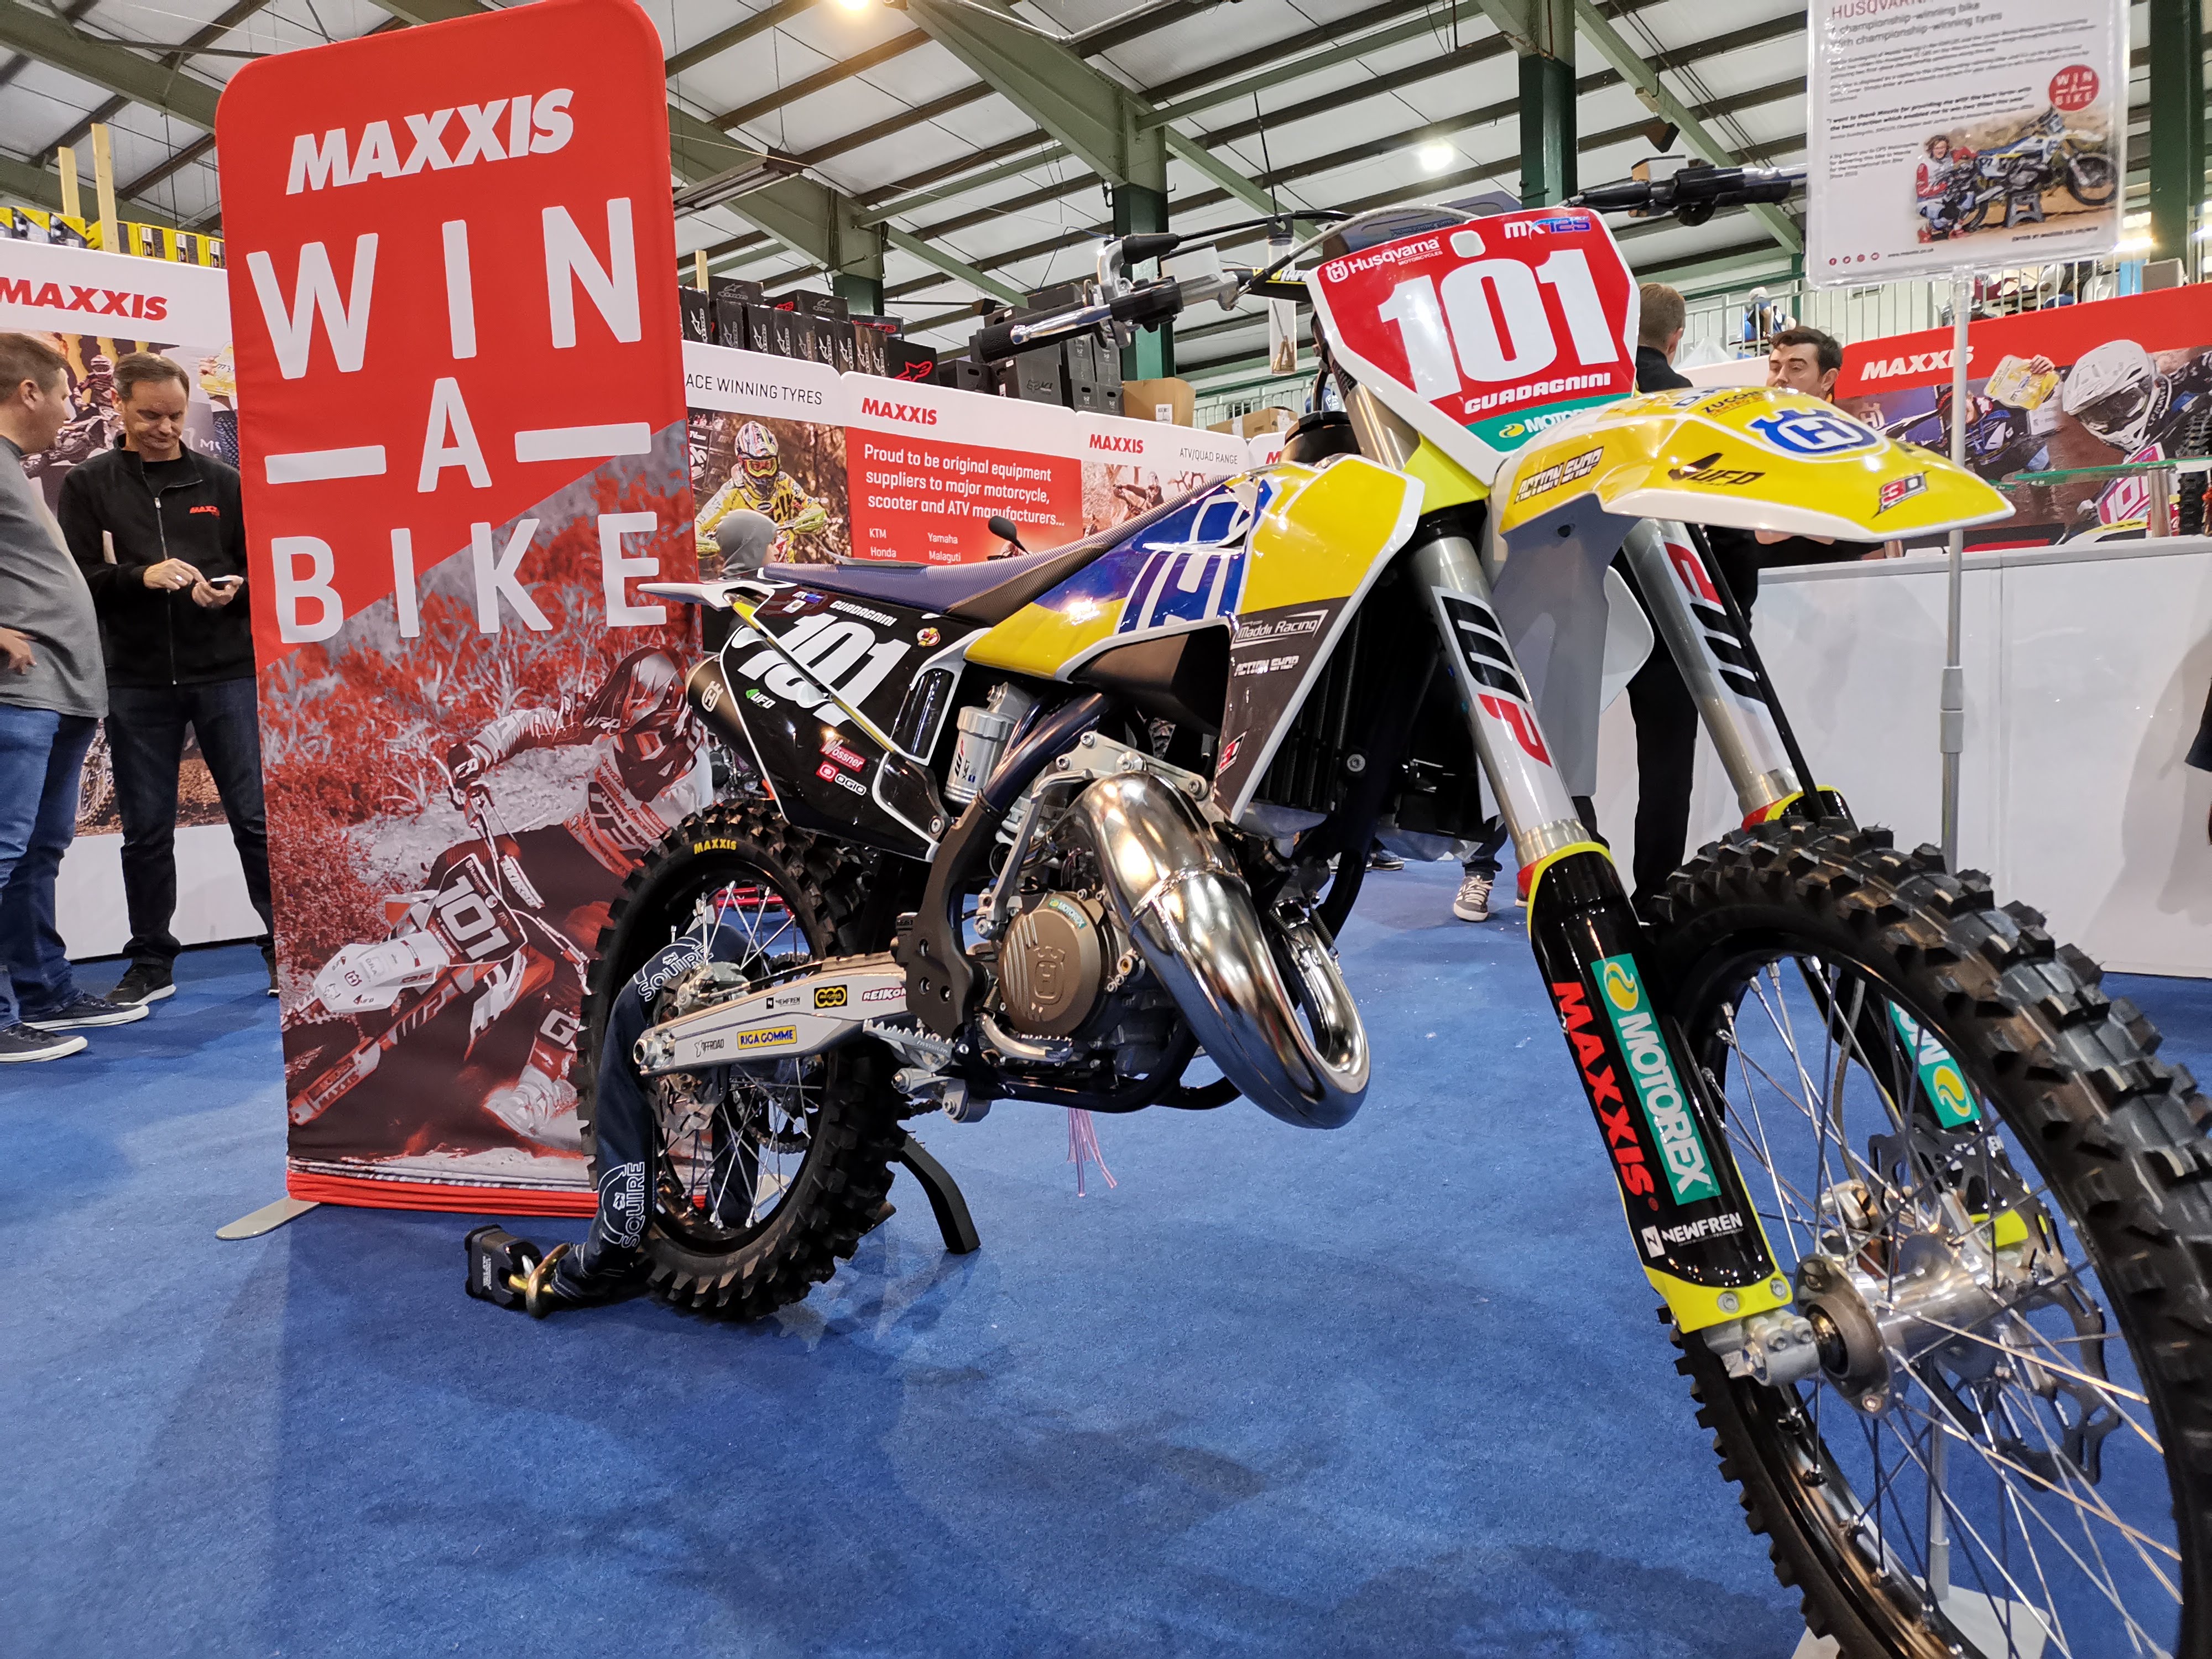 Maxxis deliver a brand new Husqvarna TC 125 to the competition winner